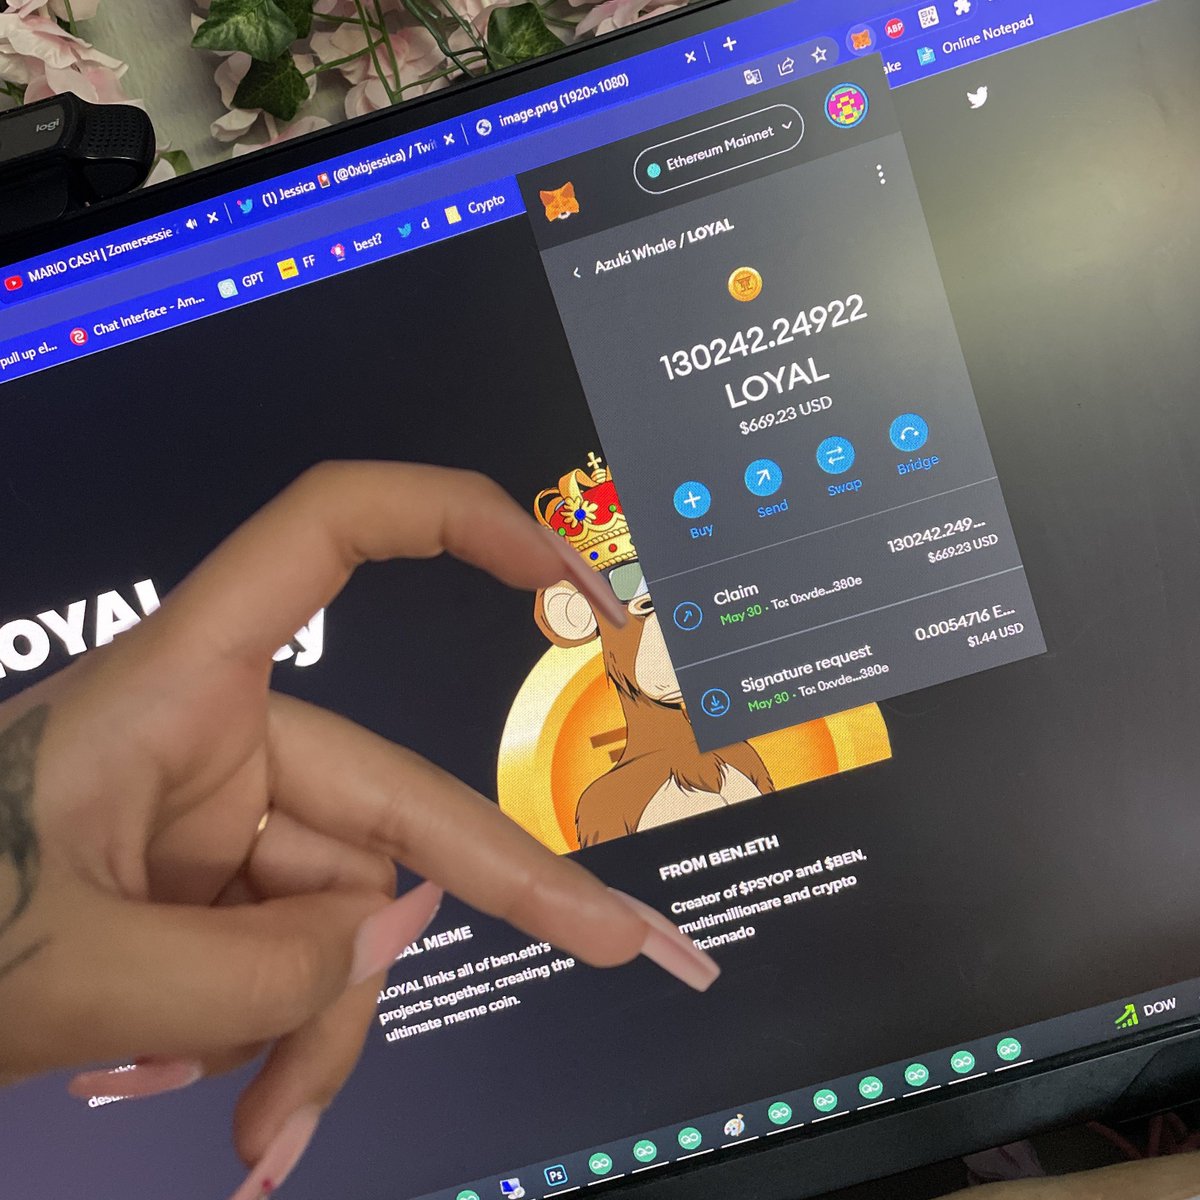 omg i just claimed $670 from the $LOYAL airdrop? claim now 👇

🔗 loyal.foundation 🎁

$ADA #crypto #100X #MATIC BTC $SUI Ether #USDC $QNT #NFTs $XEN $APE #ETH #airdrops $LINK $DOGE $XRP $PEPE $MONG $BOB $WAGMI #MATIC $CAW $SHIB $FLOKI $DAVE $PSYOP $BEN #USDT $BTC Pauly